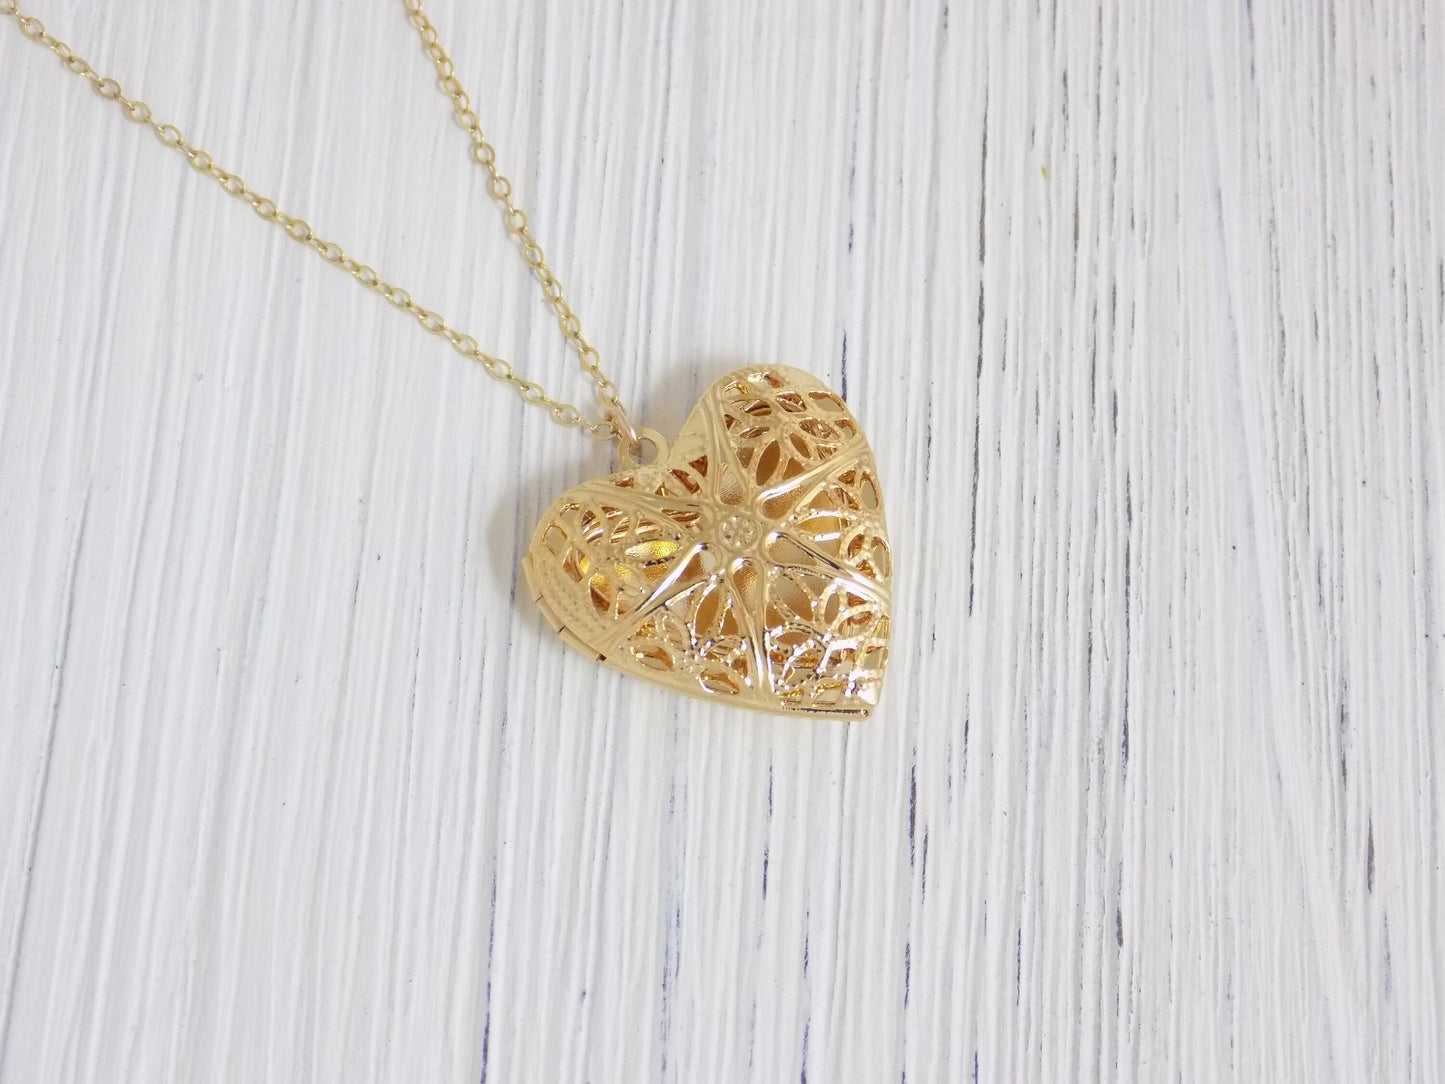 Heart Necklace - Gold Locket Necklace